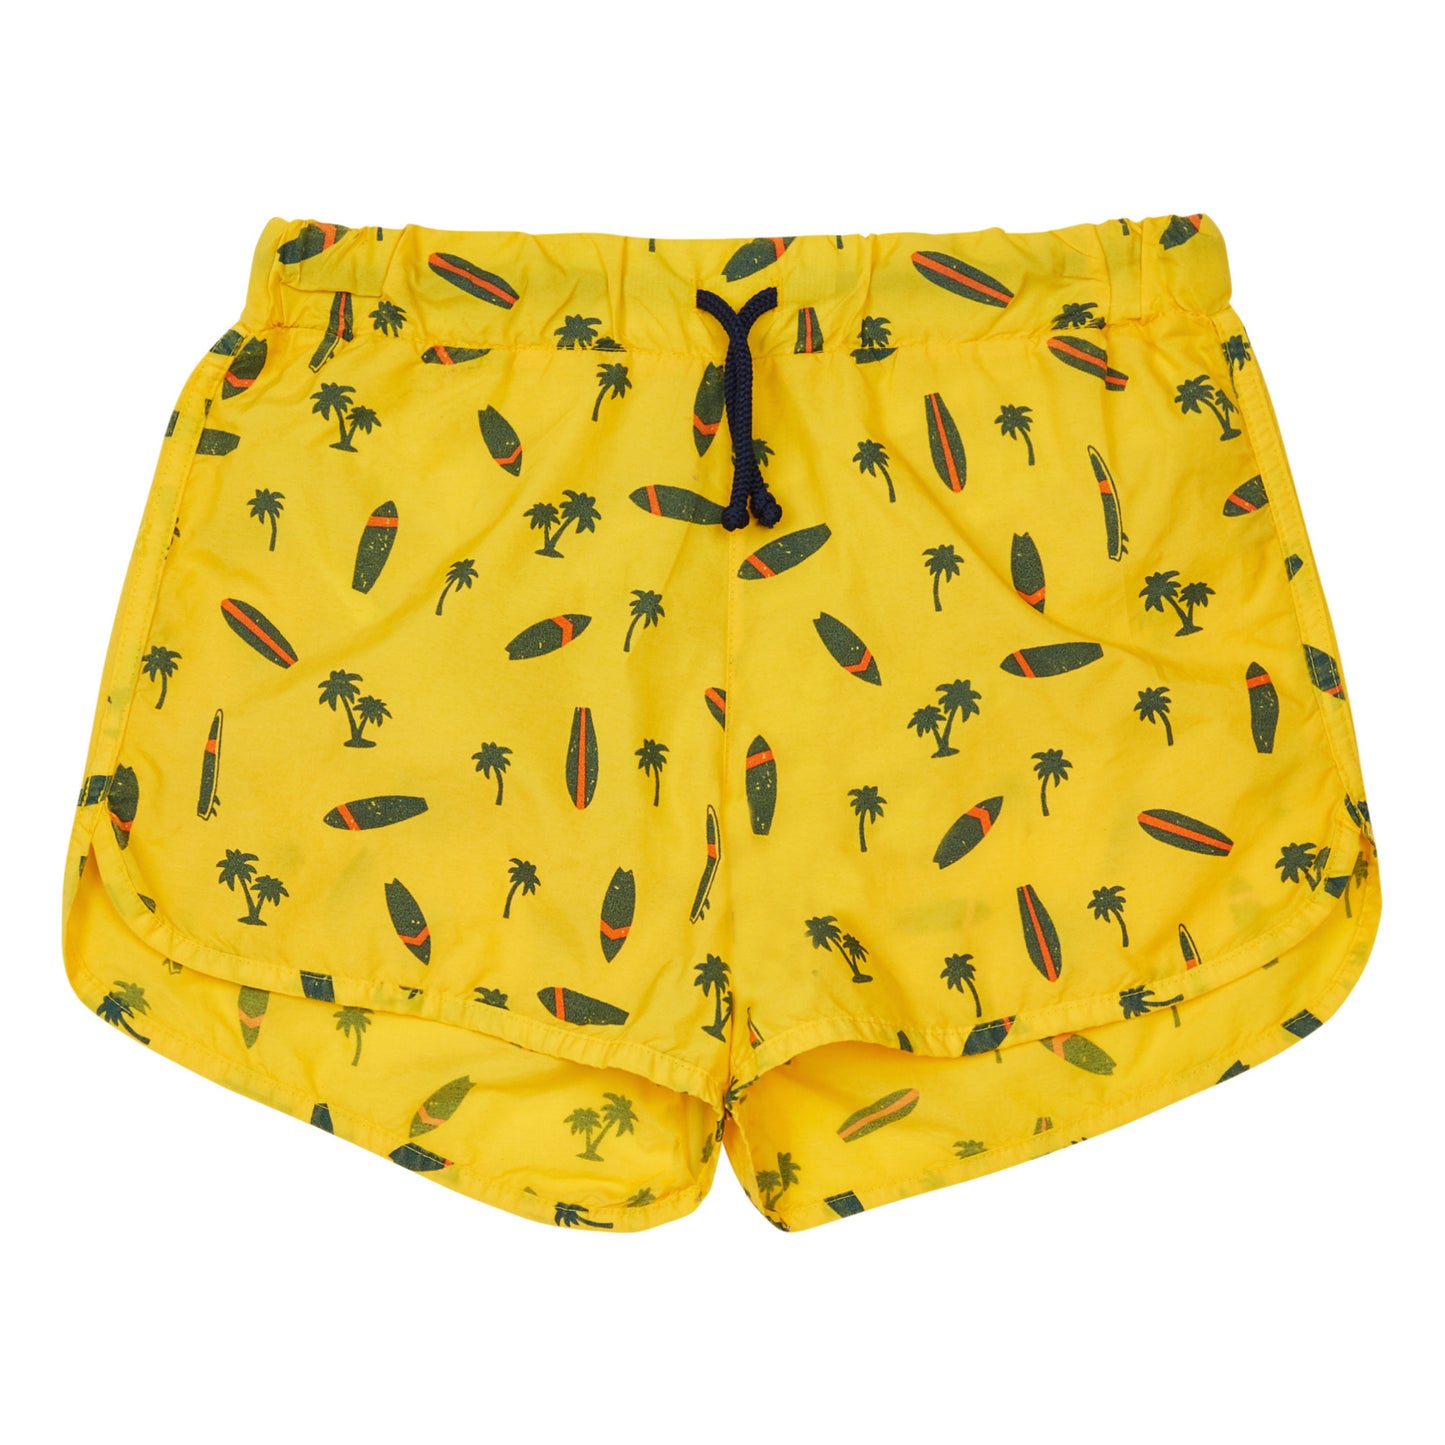 boys lyellow swim trunks with surfboards and palm tree design